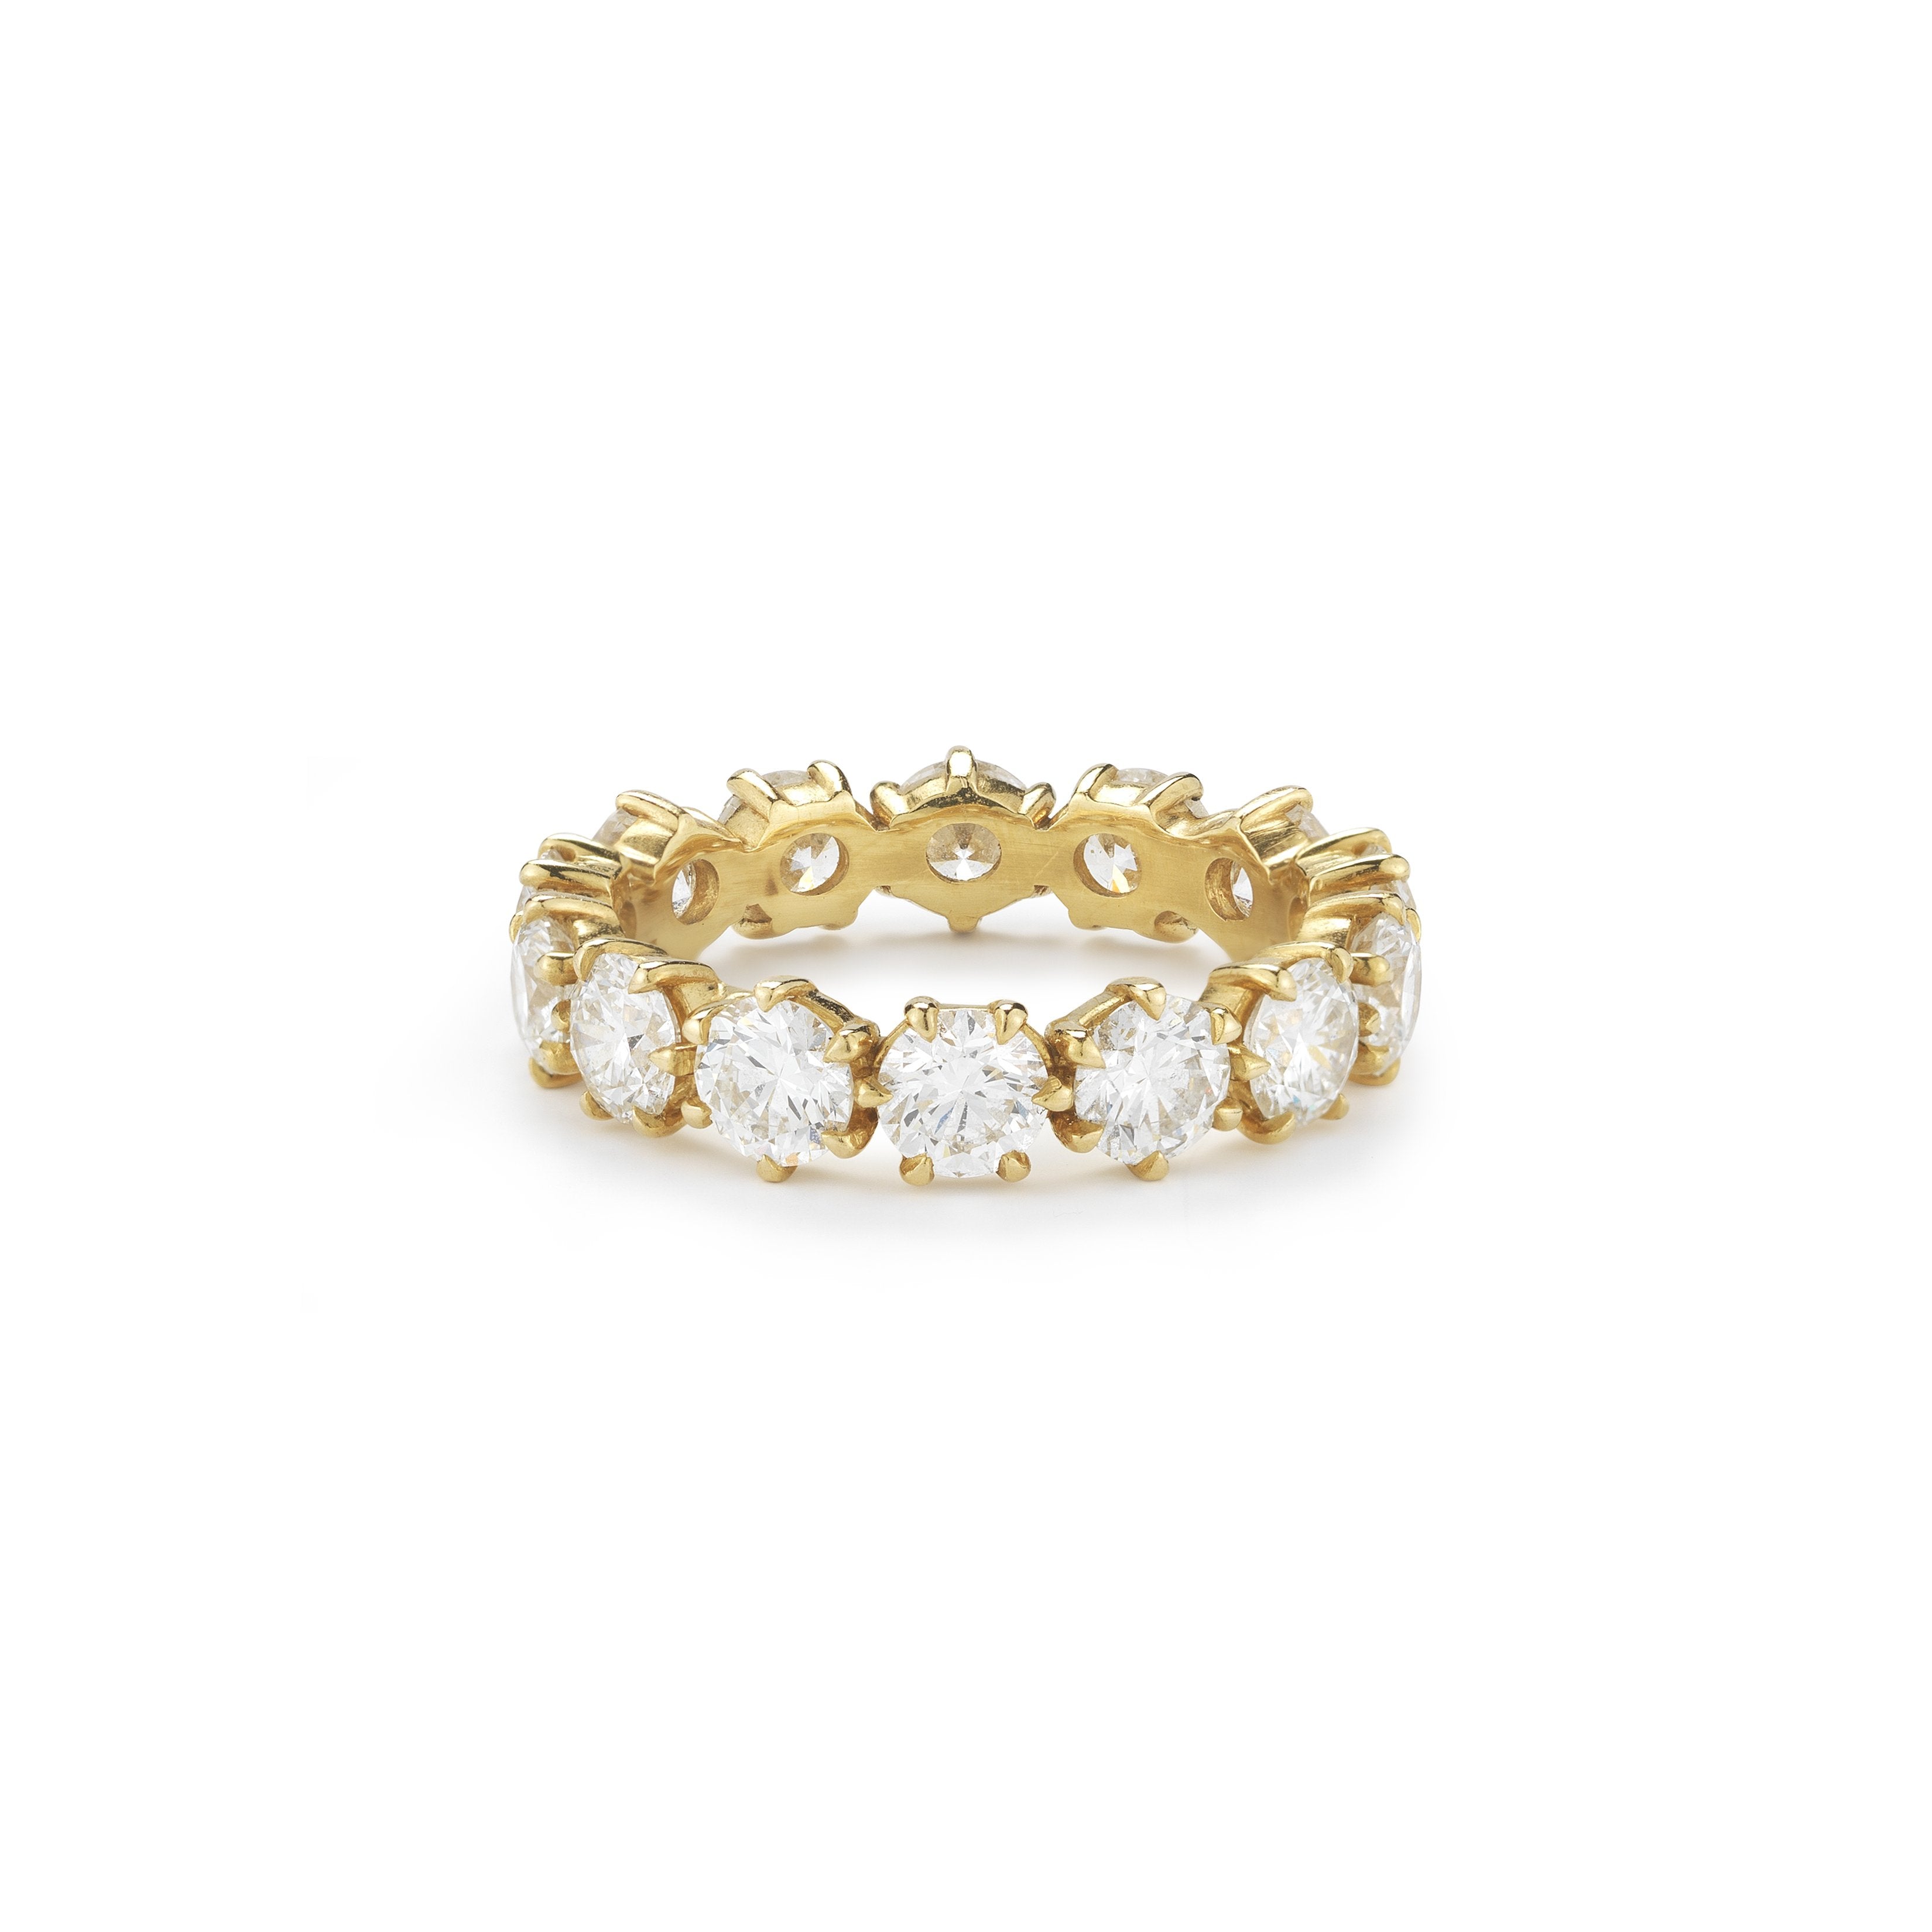 Catherine Eternity No. 5 in 18K Yellow Gold